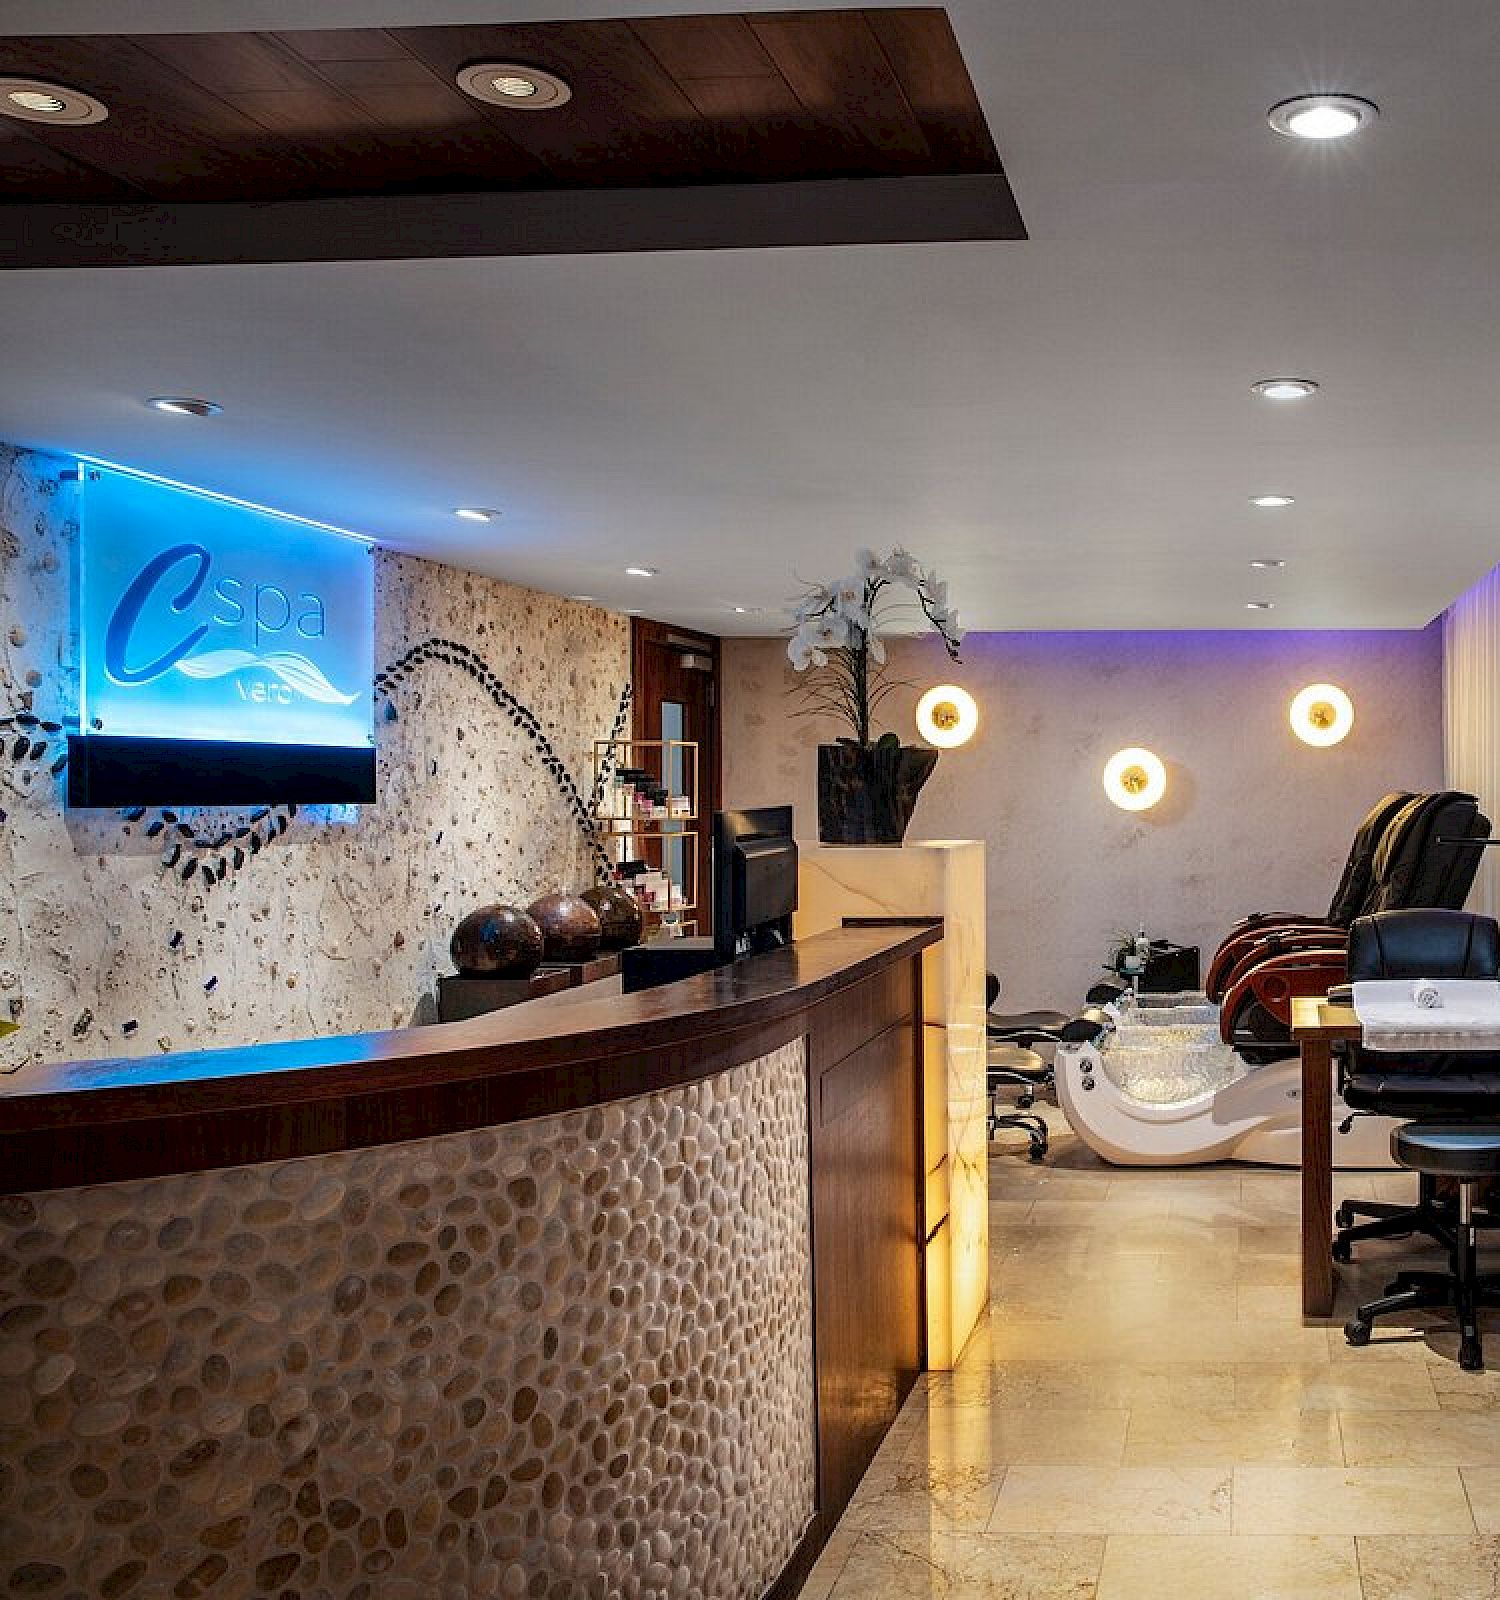 The image shows a modern spa reception area with a massage chair, shelves stocked with products, and a curved counter.